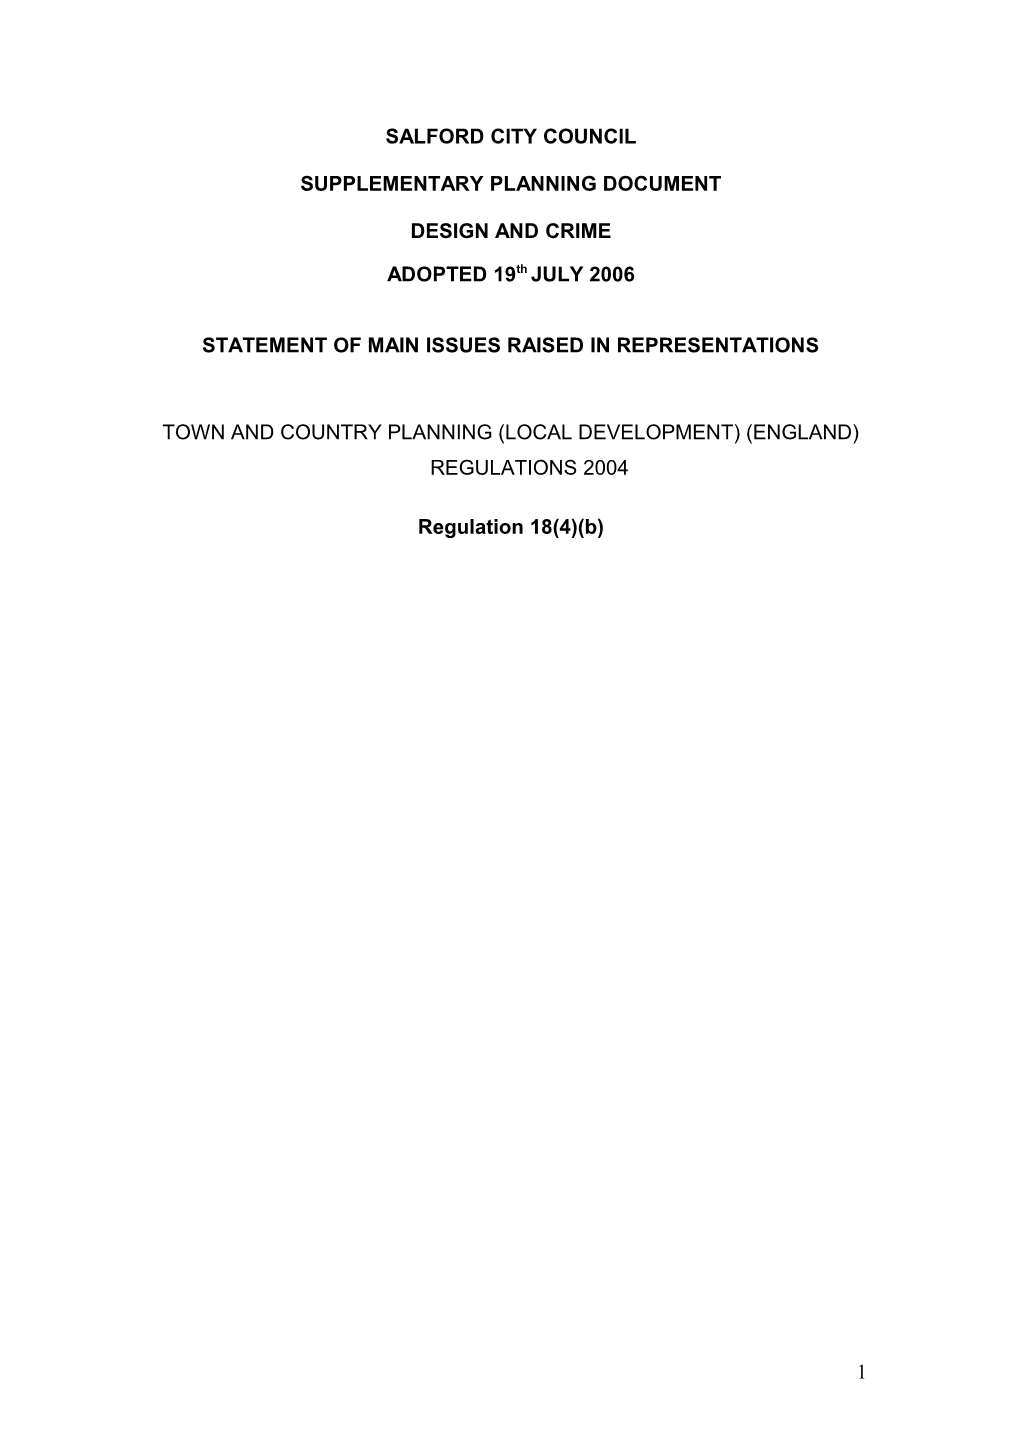 A Consultation Draft Supplementary Planning Document